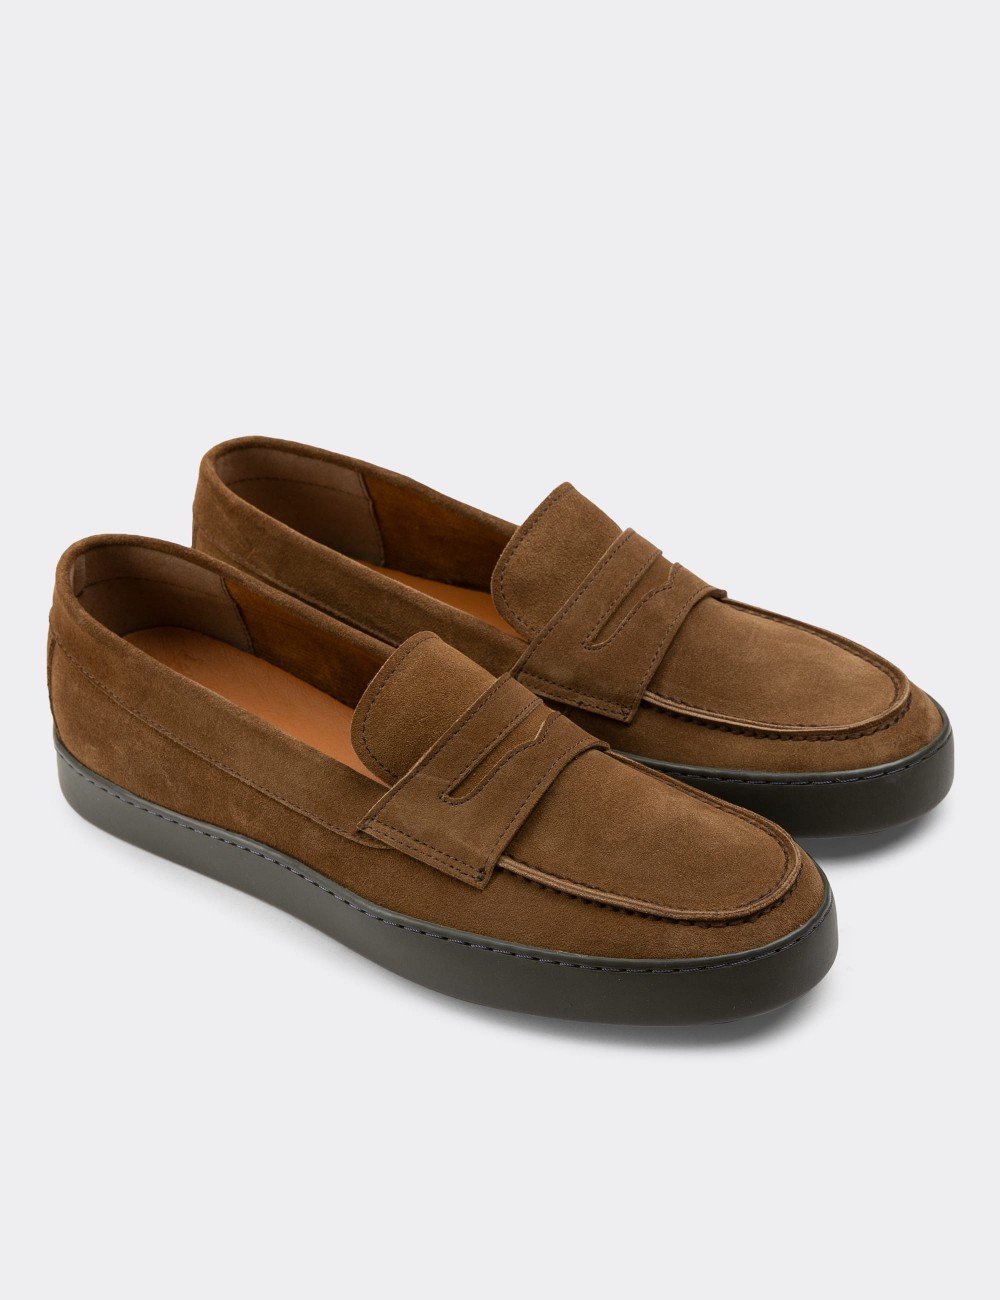 Tan Suede Leather Loafers - 01870MTBAC01